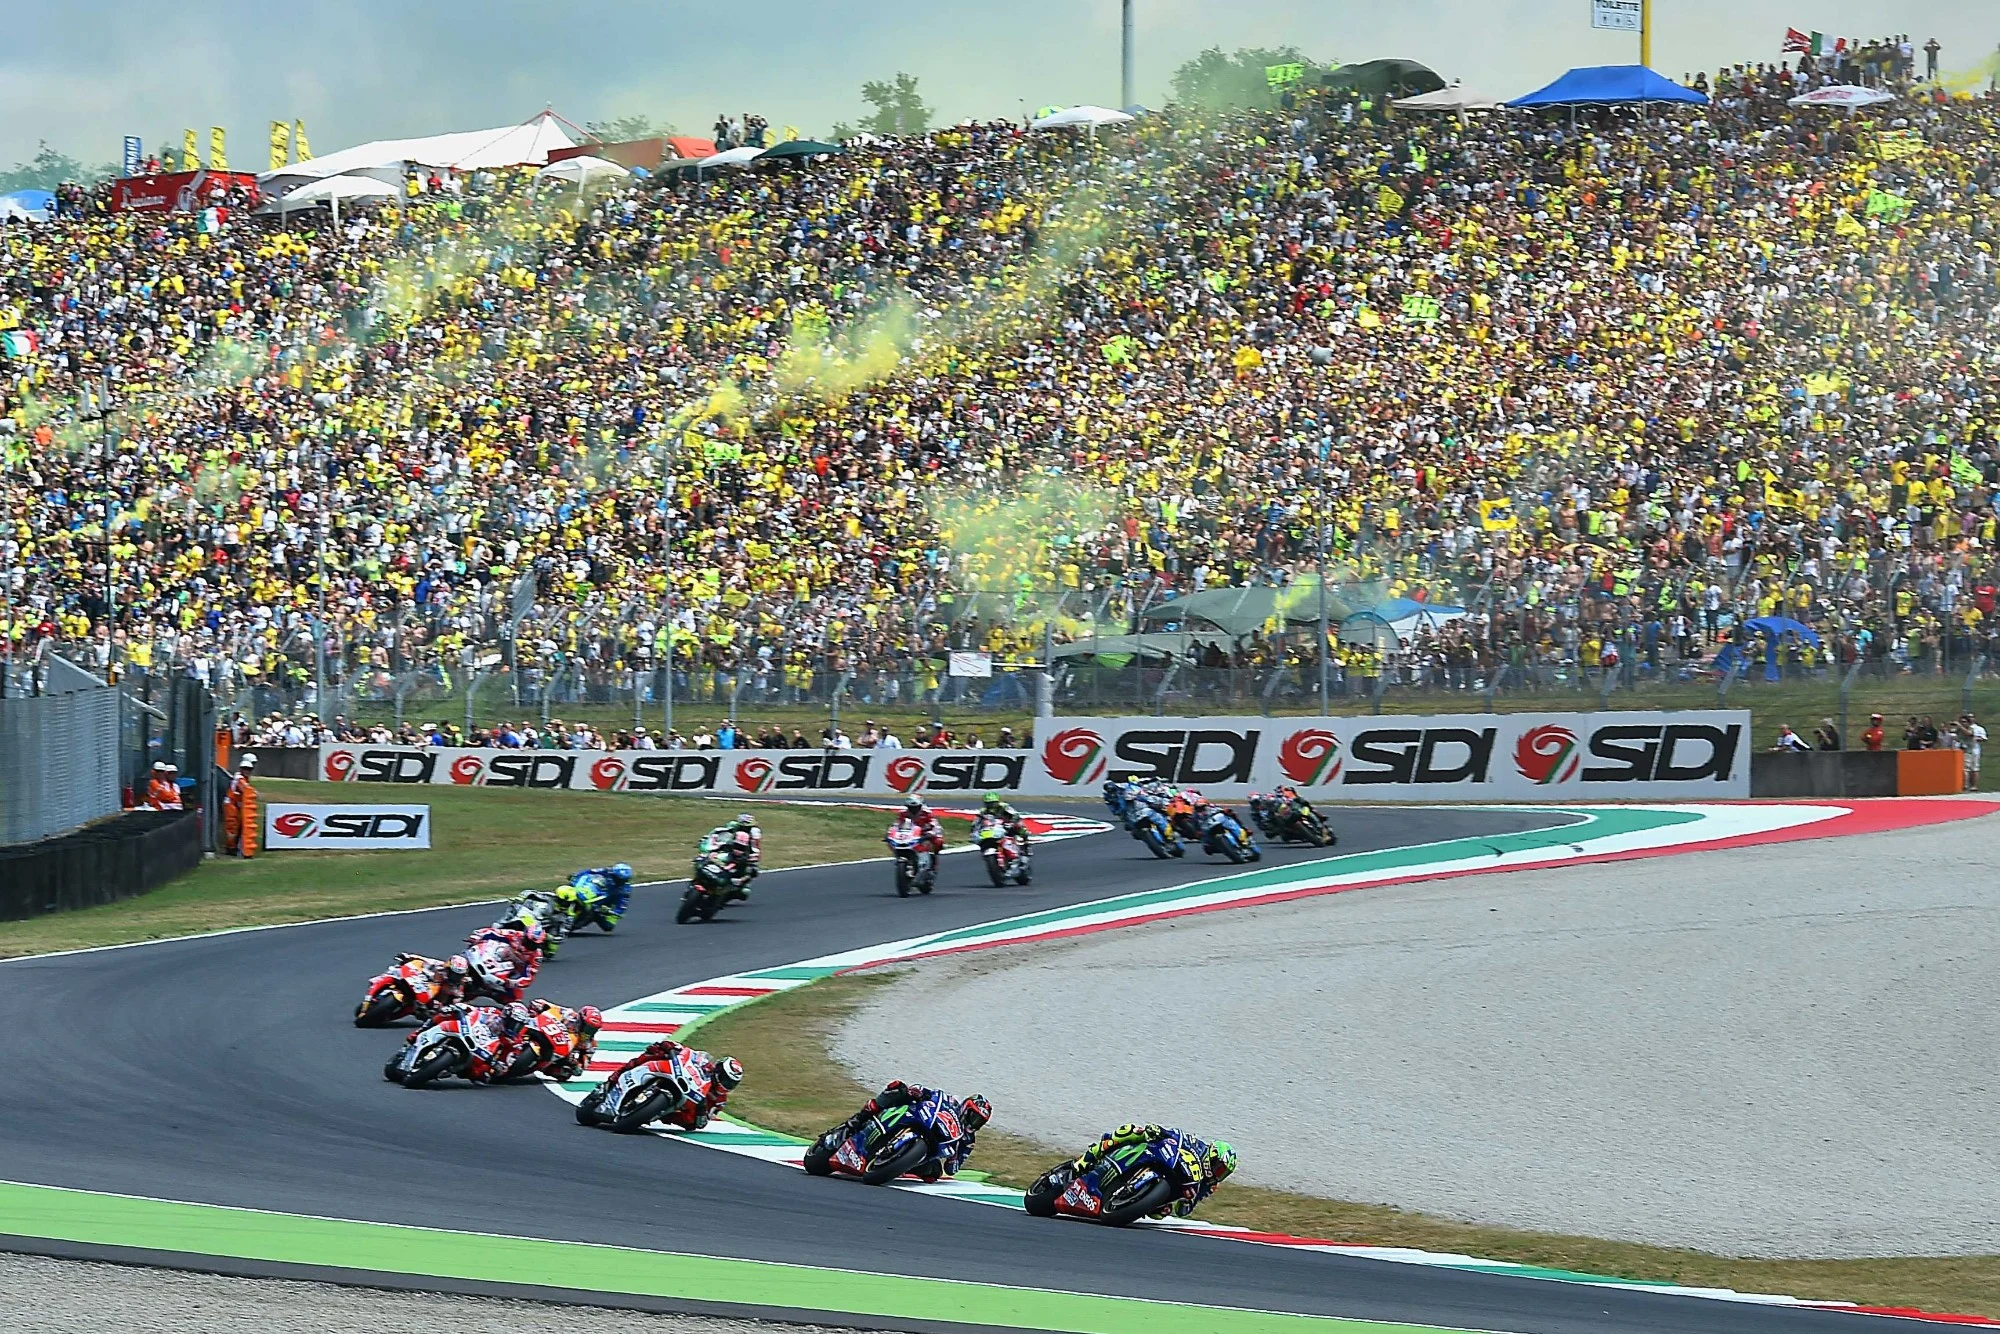 motorcycles racing at the mugello circuit in italy